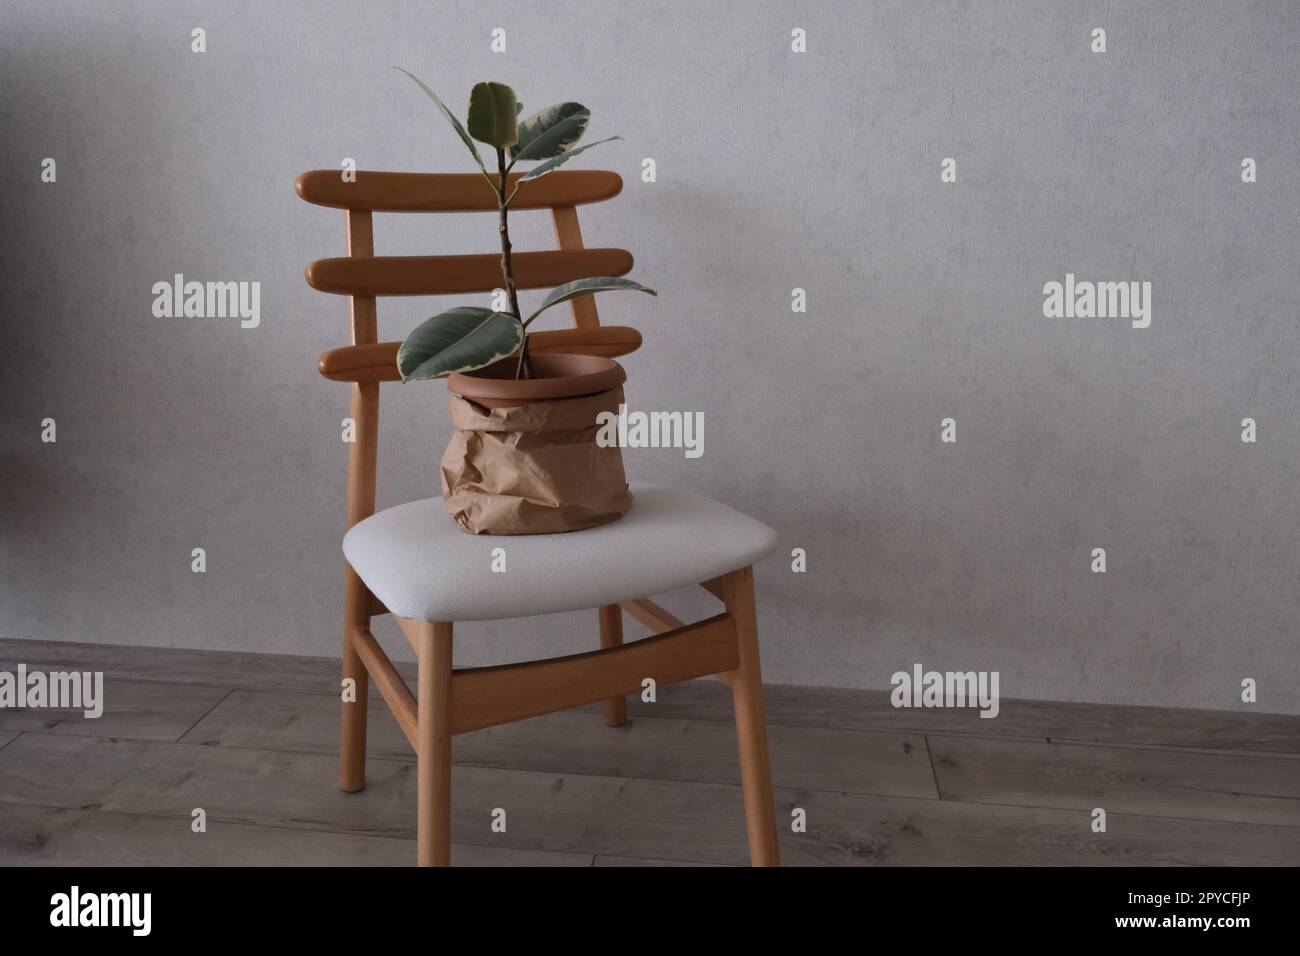 Rubber plant, Ficus Plant in a pot covered with paper bag on a wooden white chair, Ficus Elastica or Rubber Plant. Stock Photo